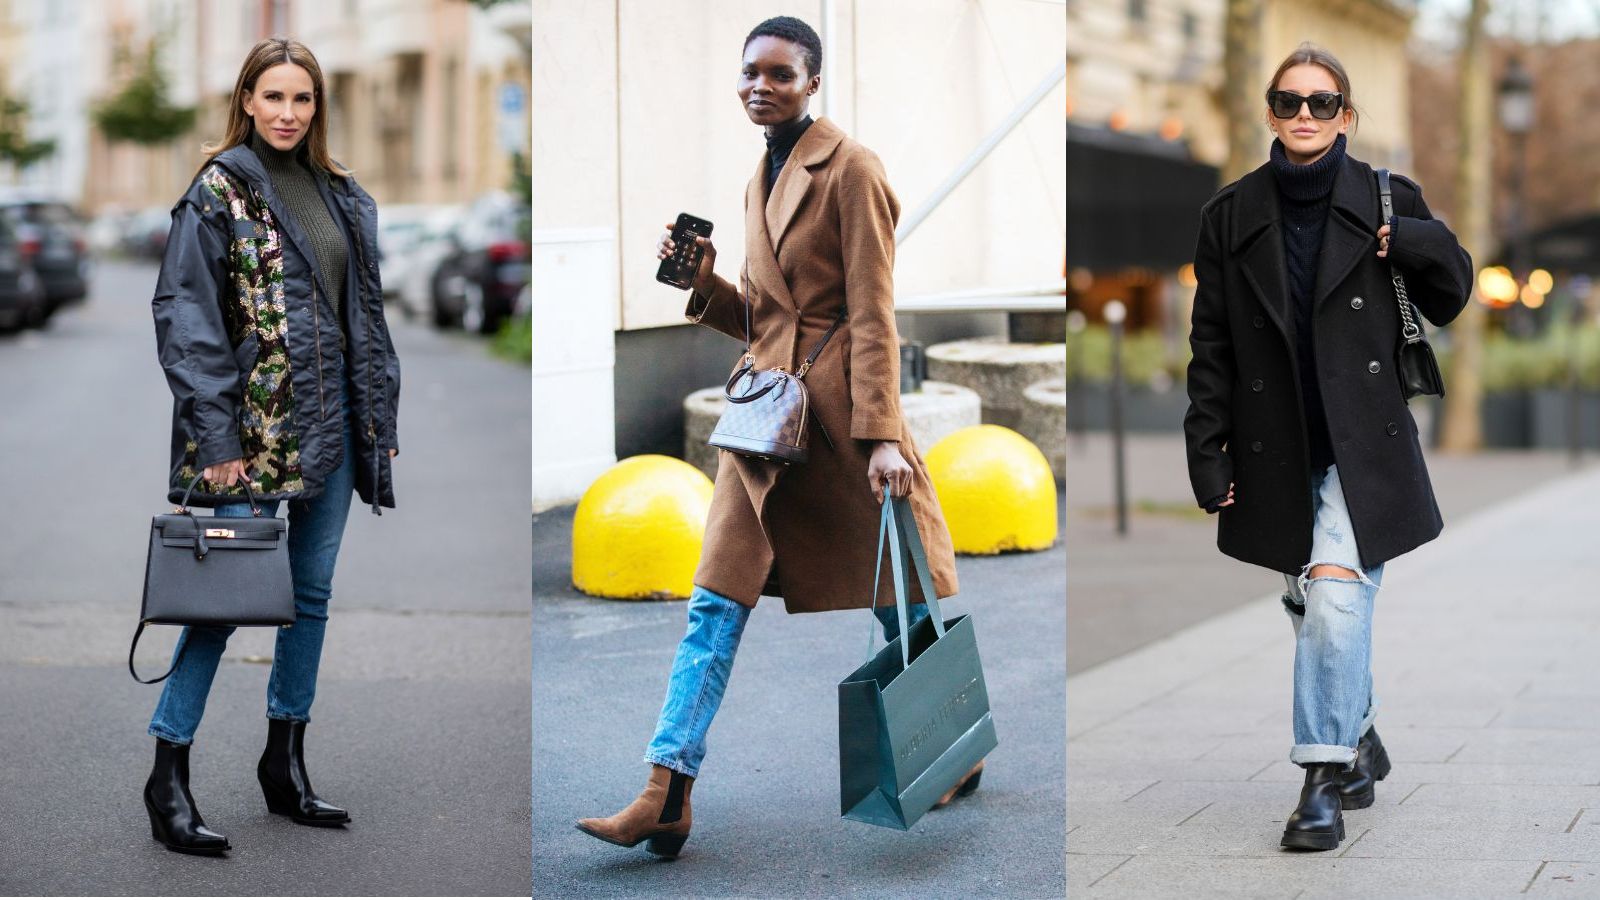 Best jeans to wear with Chelsea boots for maximum style